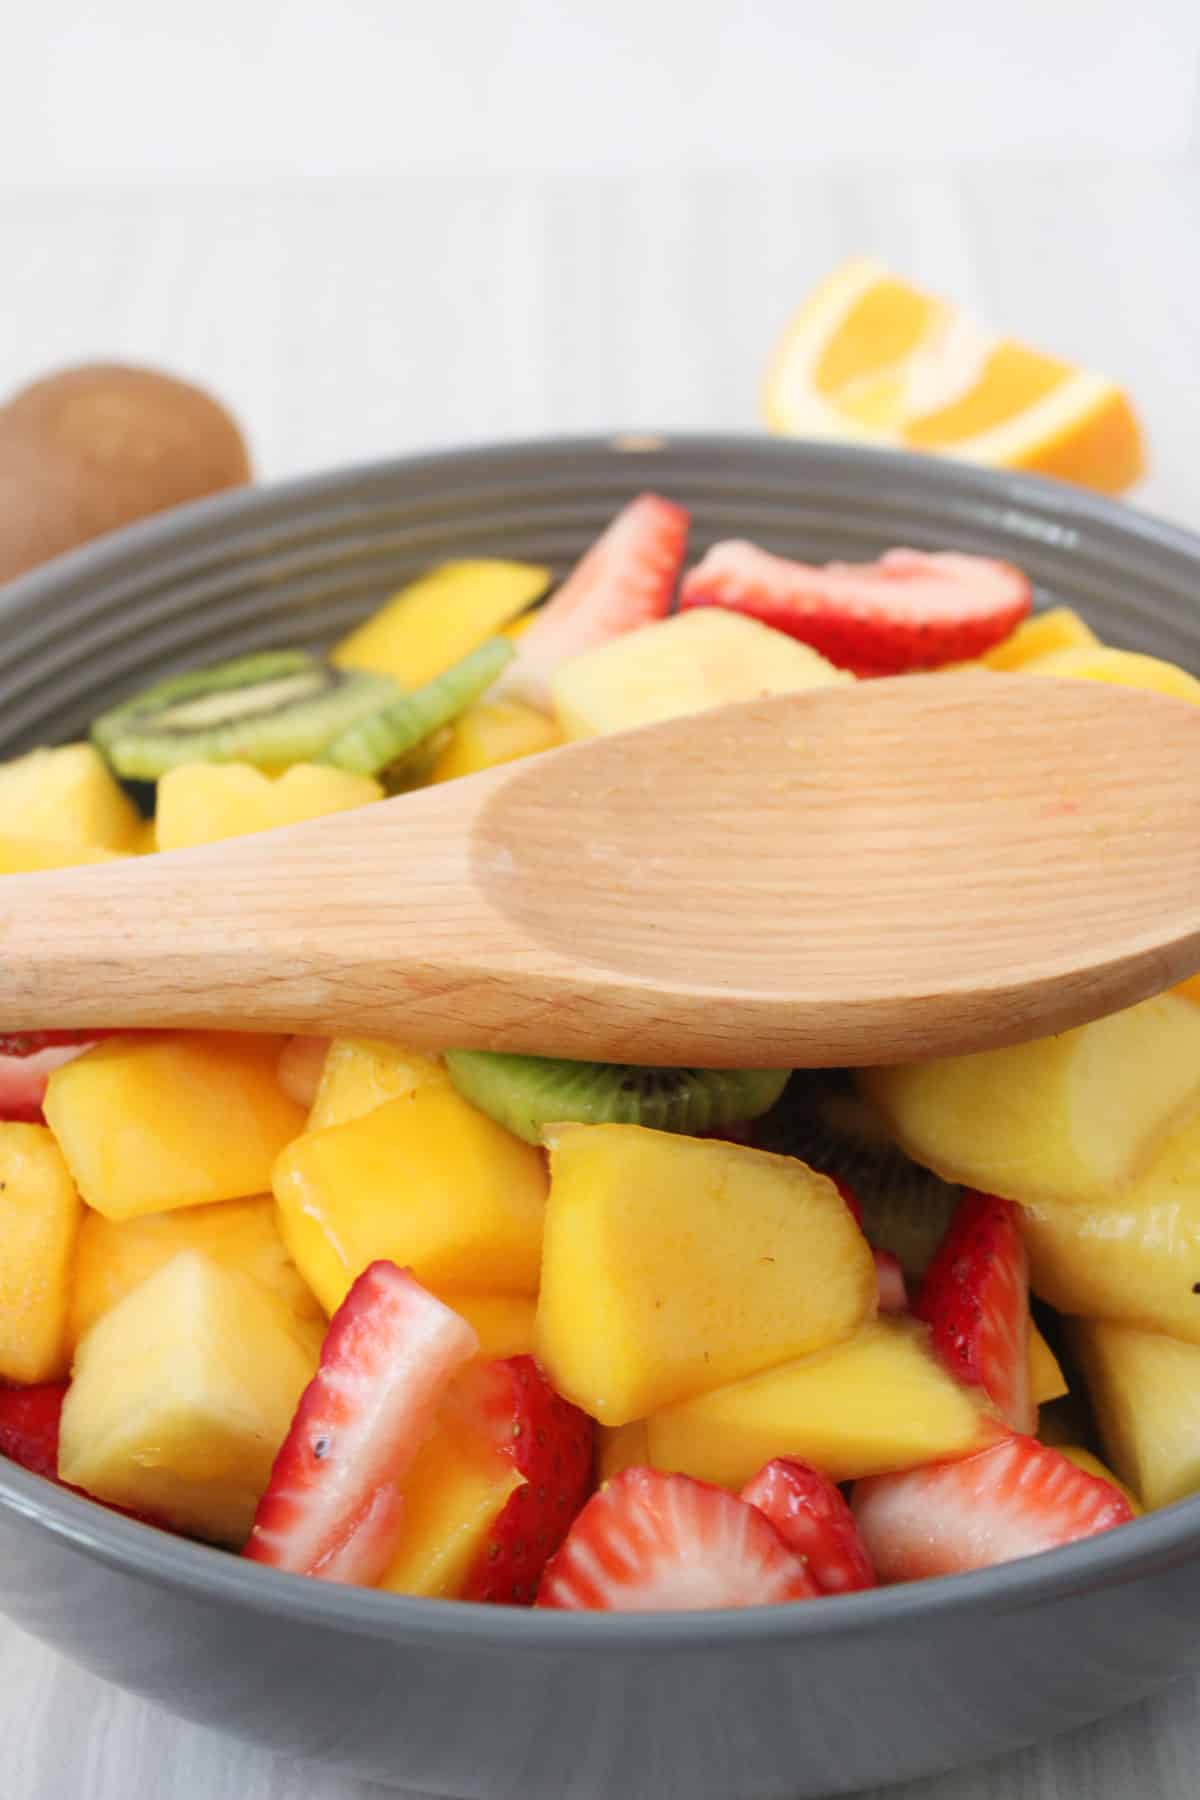 bowl of fruit salad with wooden spoon.